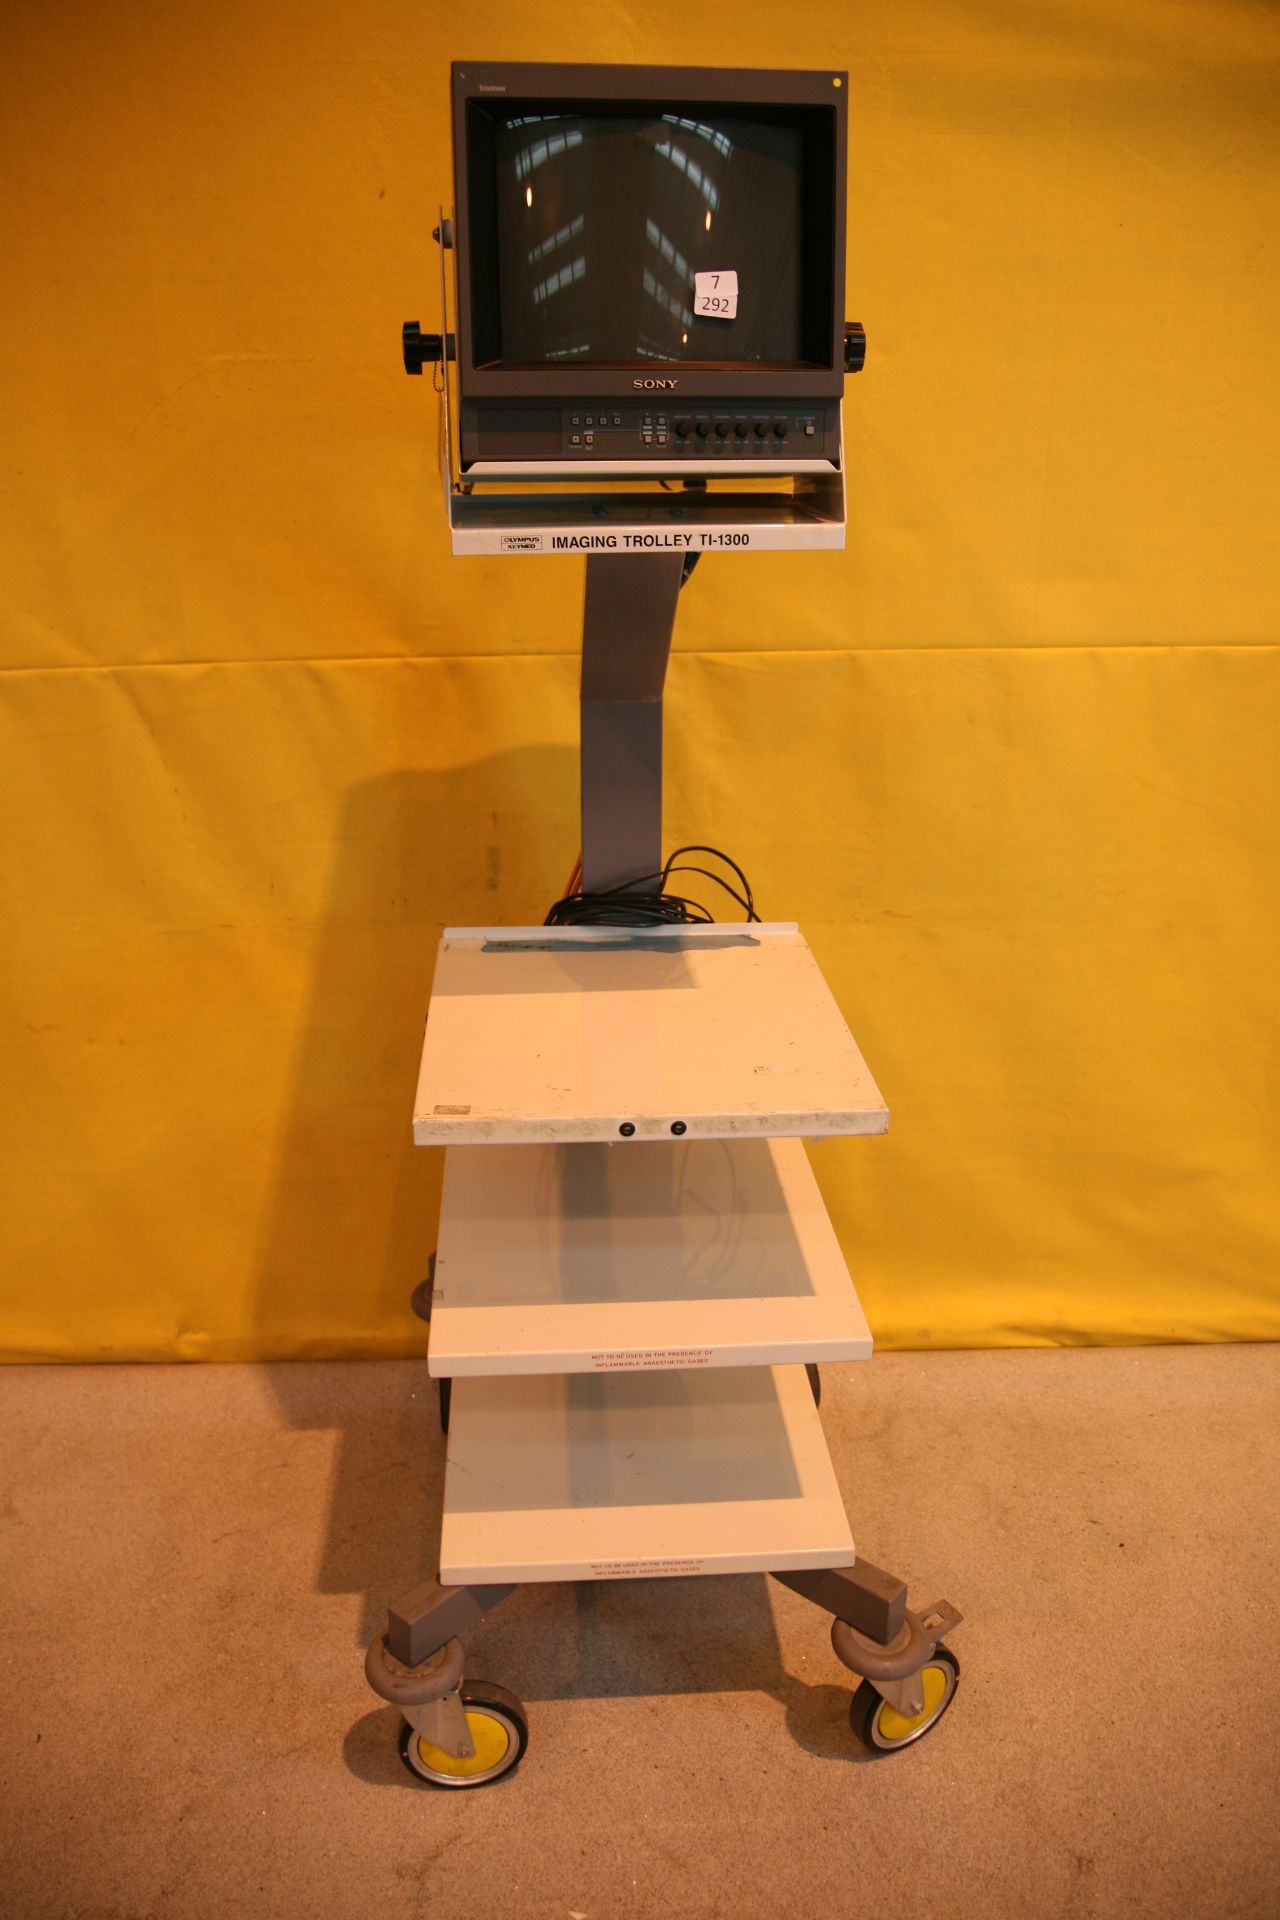 OlmpusKeymed Imaging Trolley TI-1300 Stack Tolley With Sony Trintiron Monitron